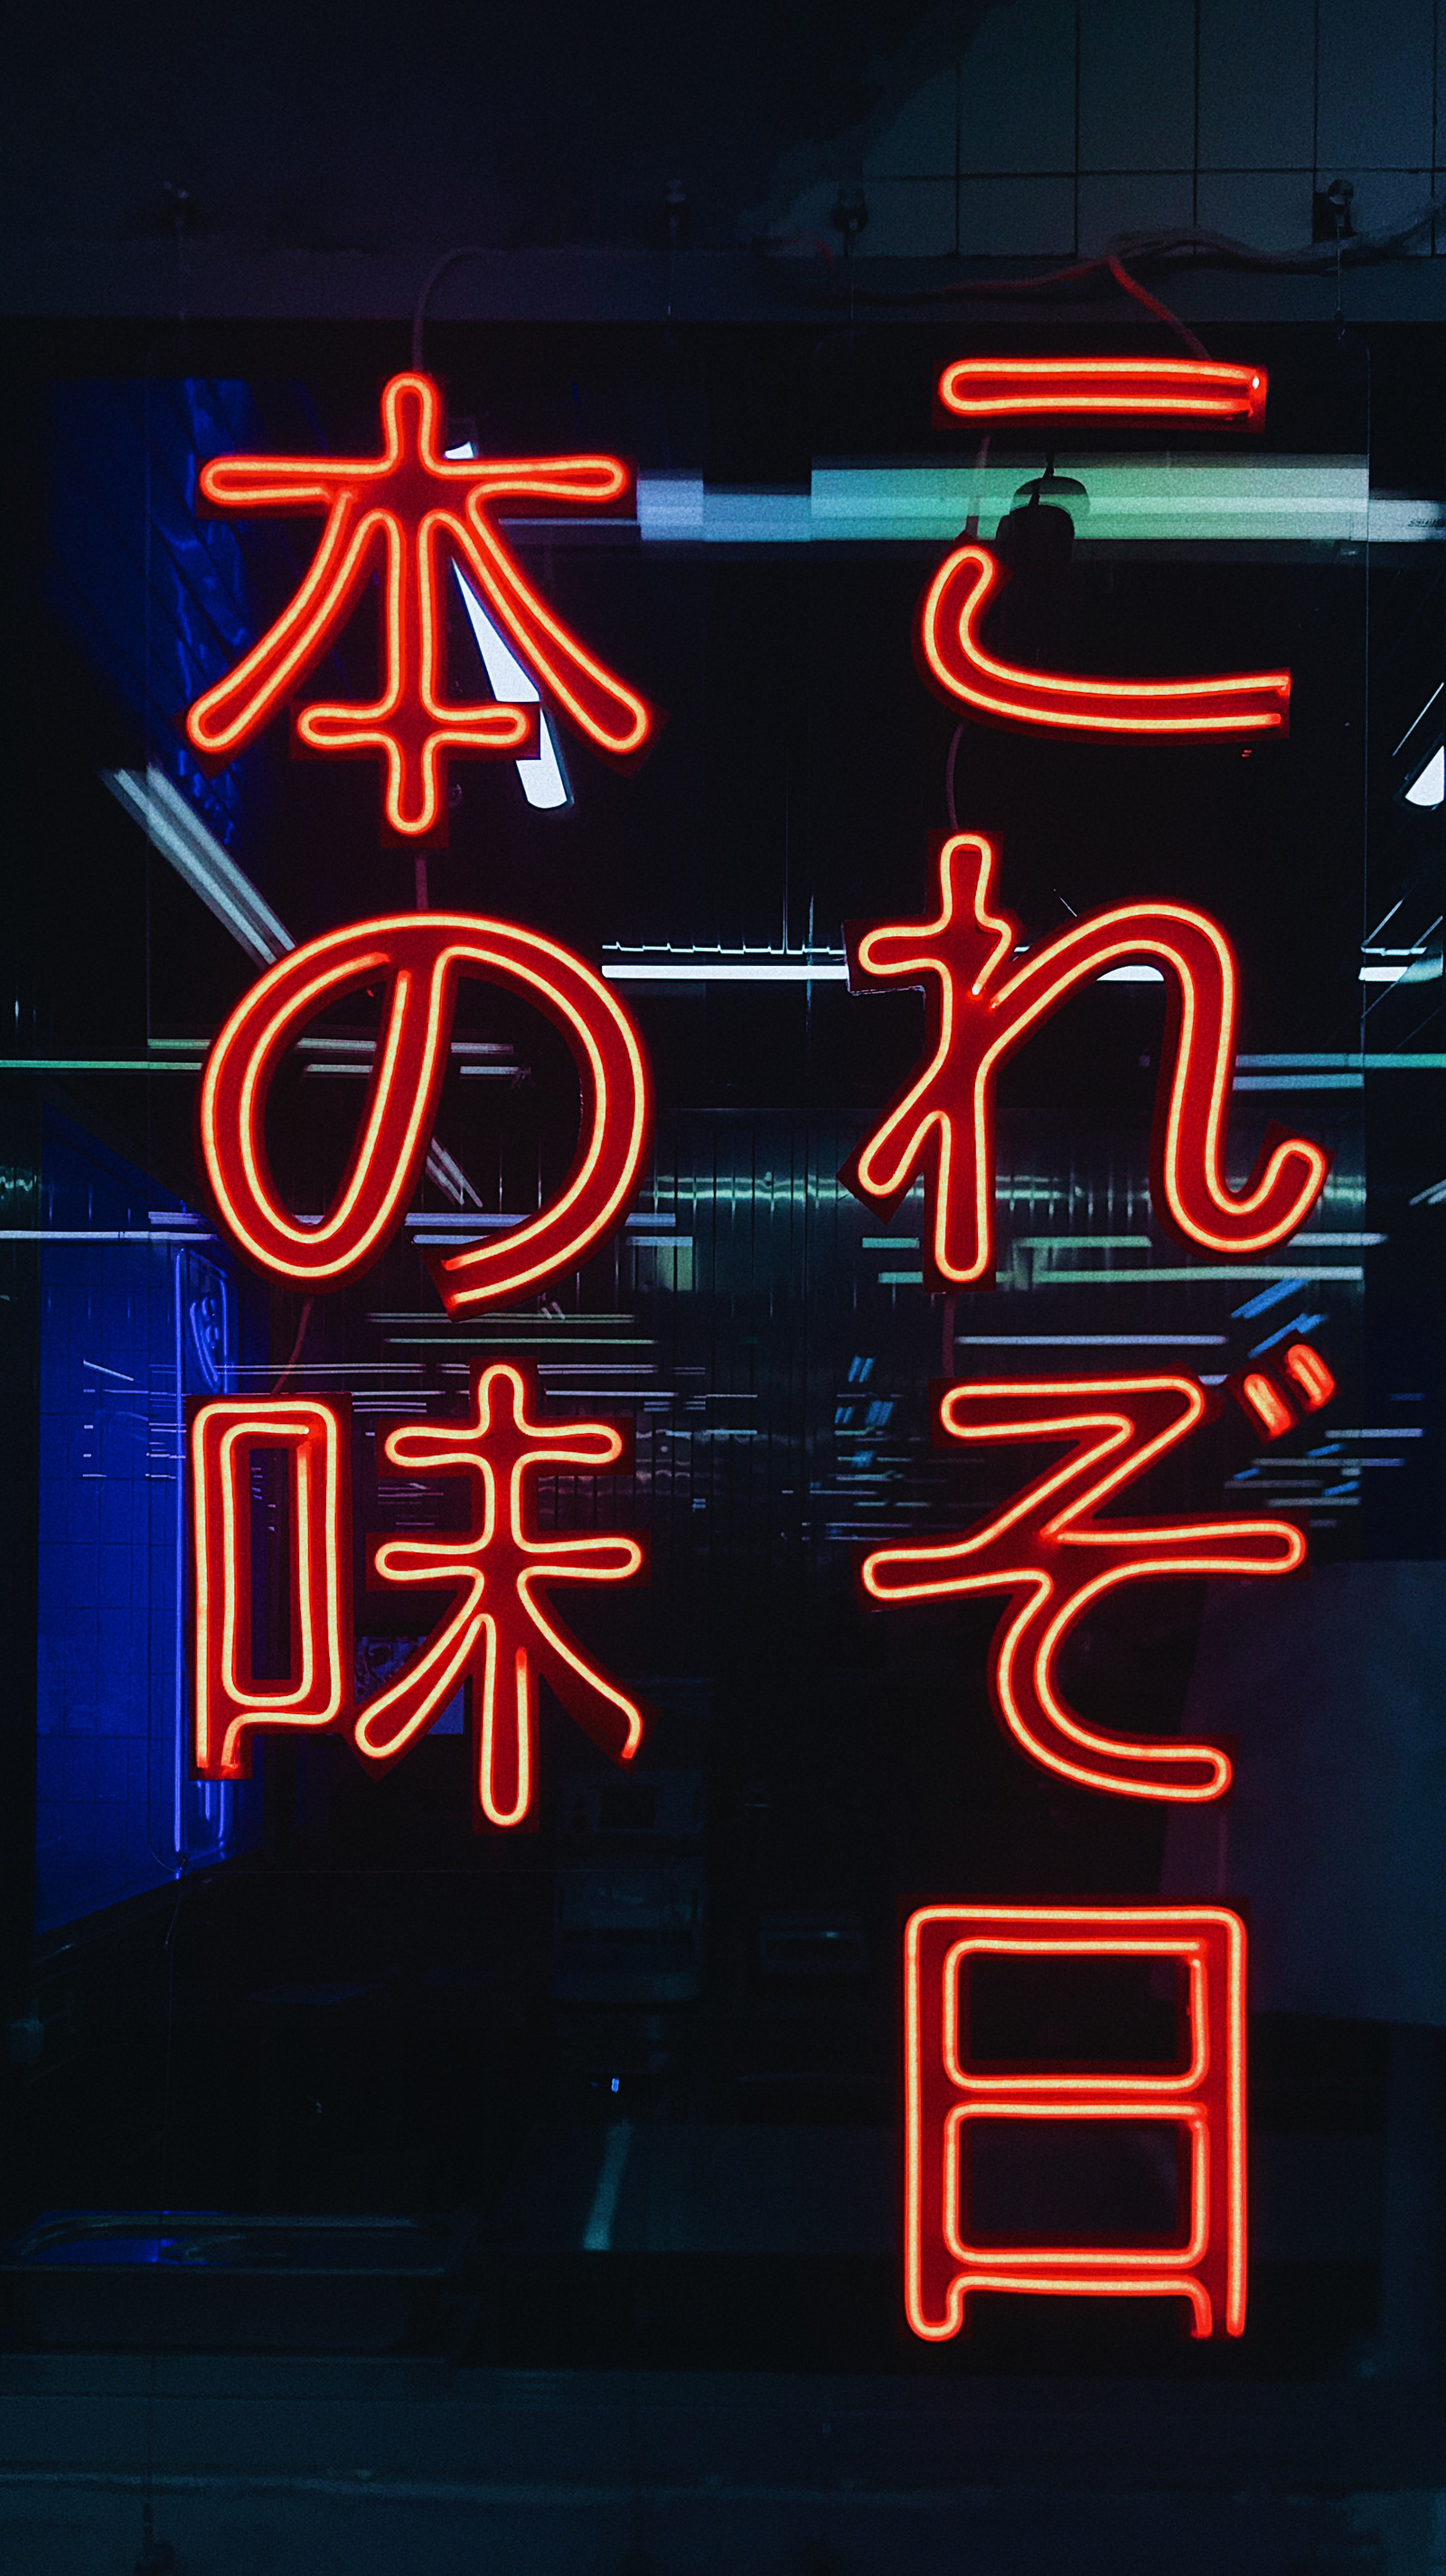 A Neon Sign in Kanji